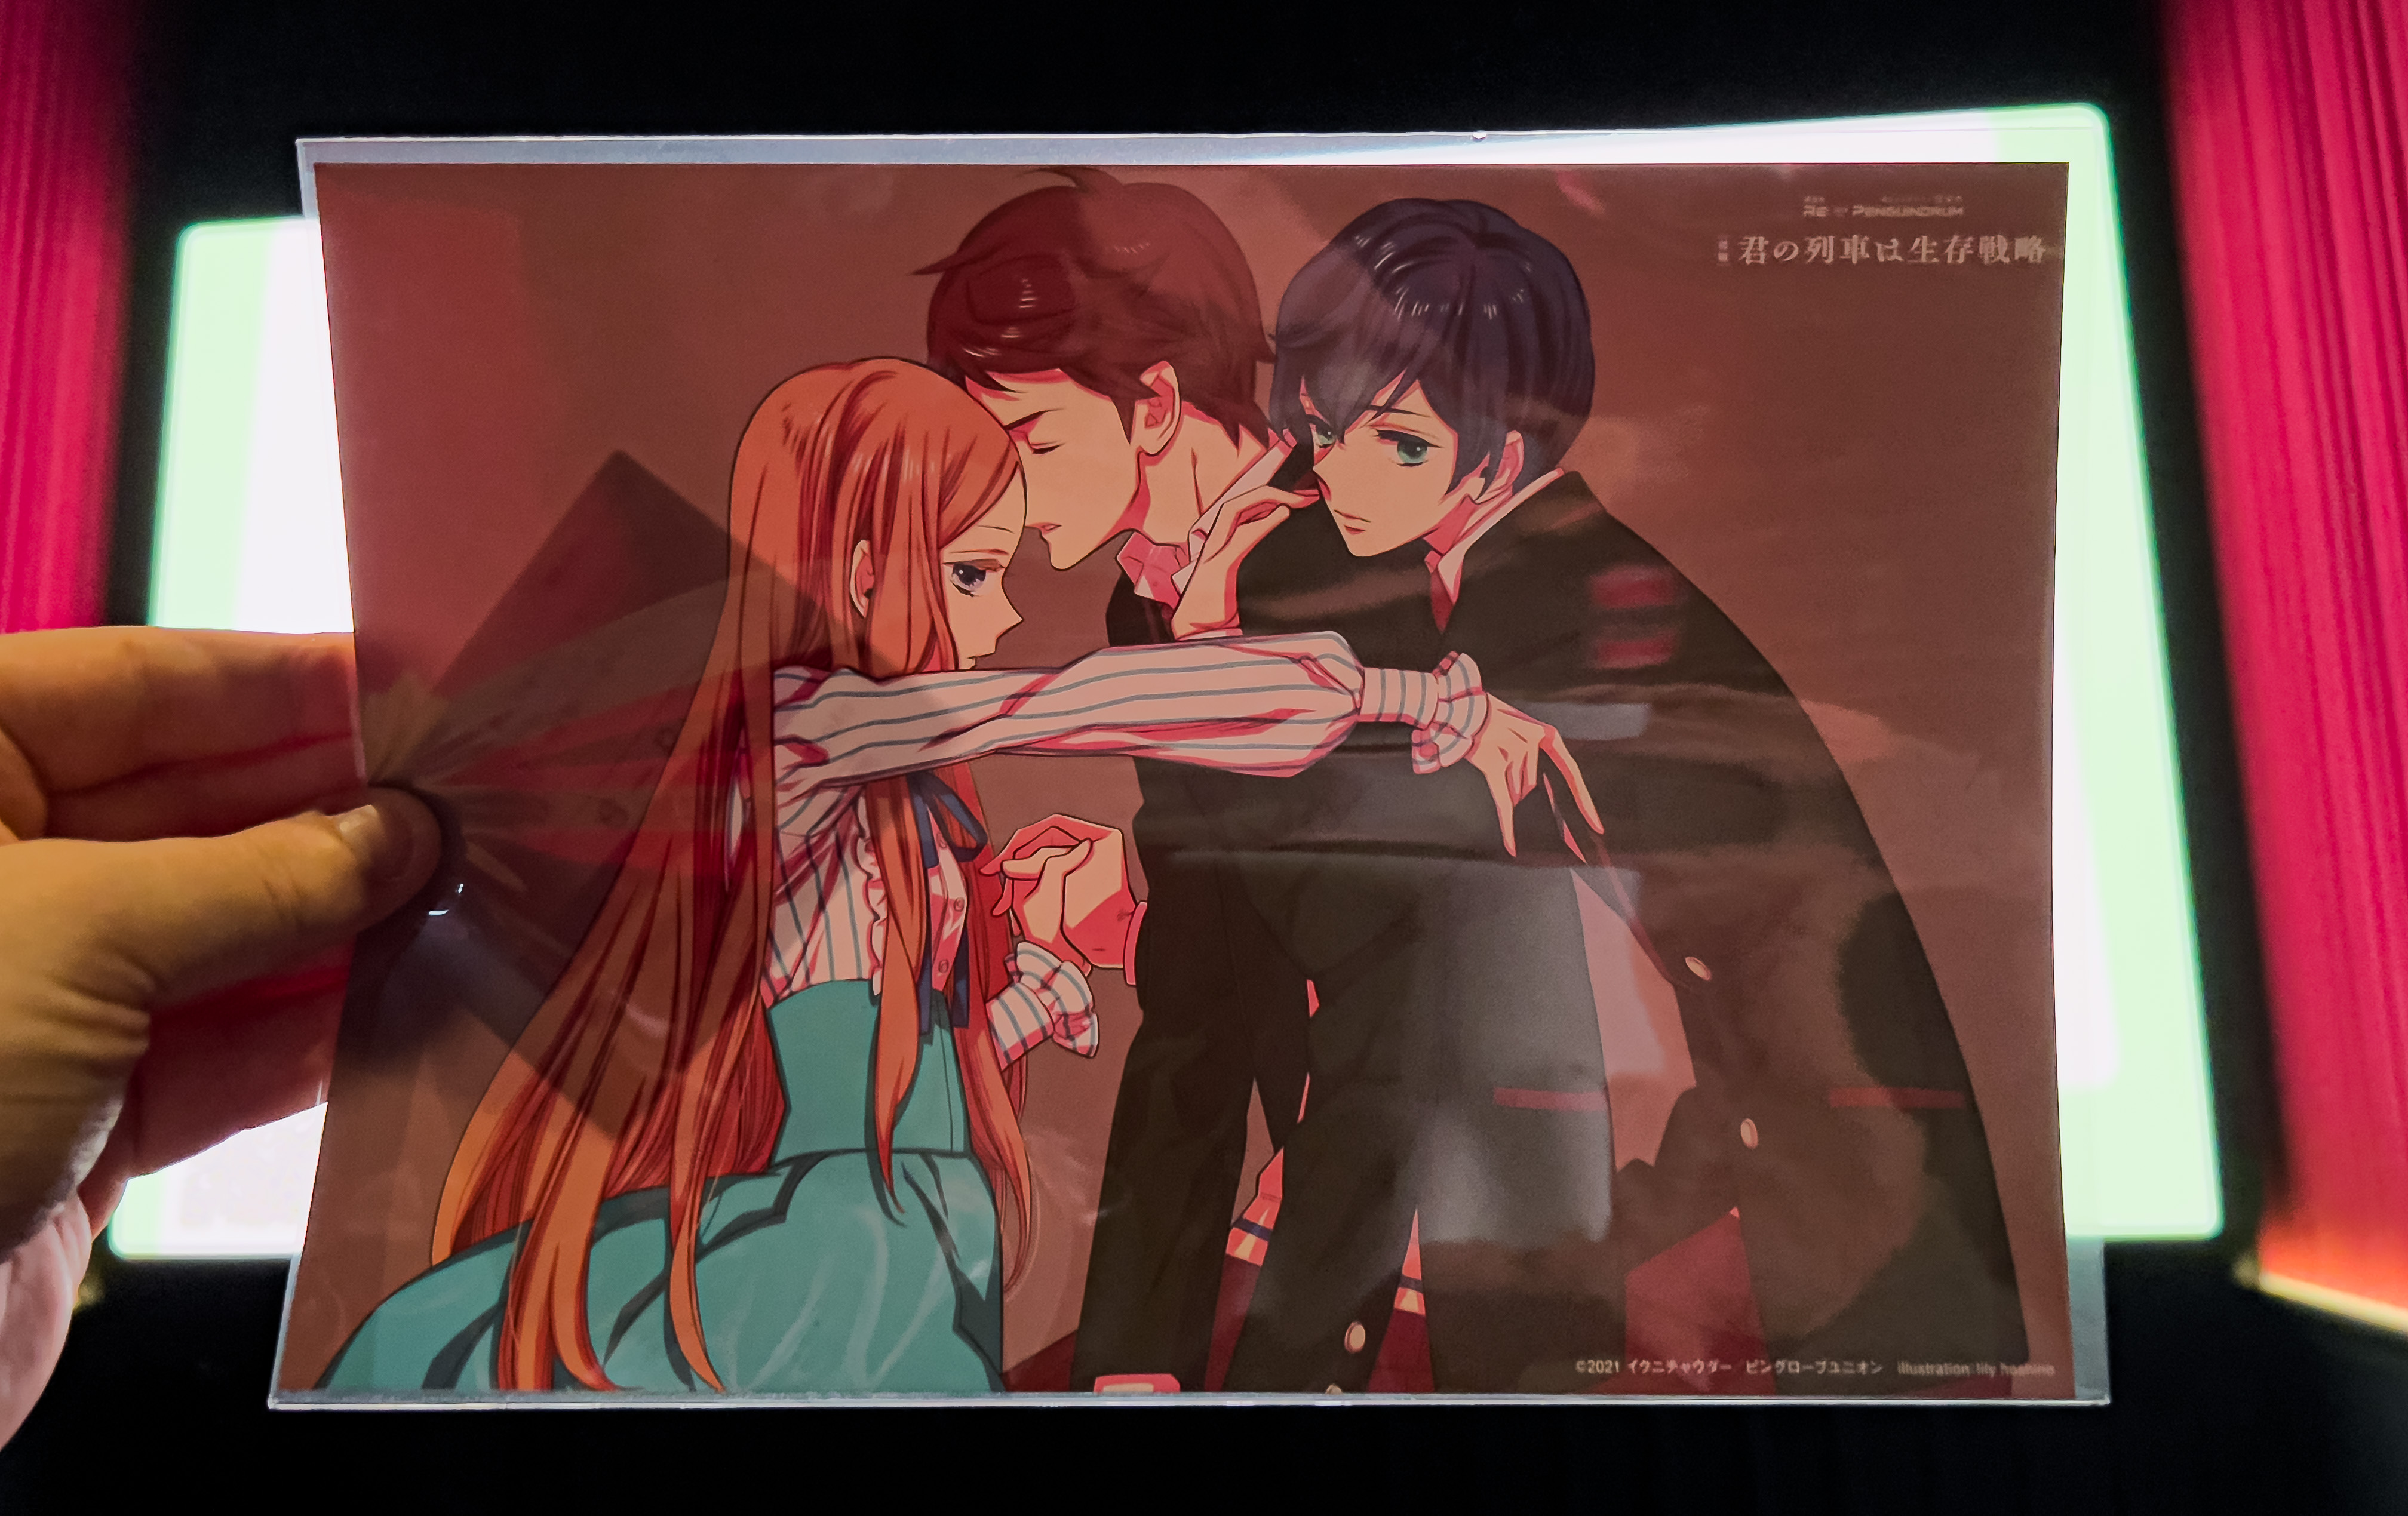 The theatrical gift given out to filmgoers drawn by Penguindrum character designer Lily Hoshino